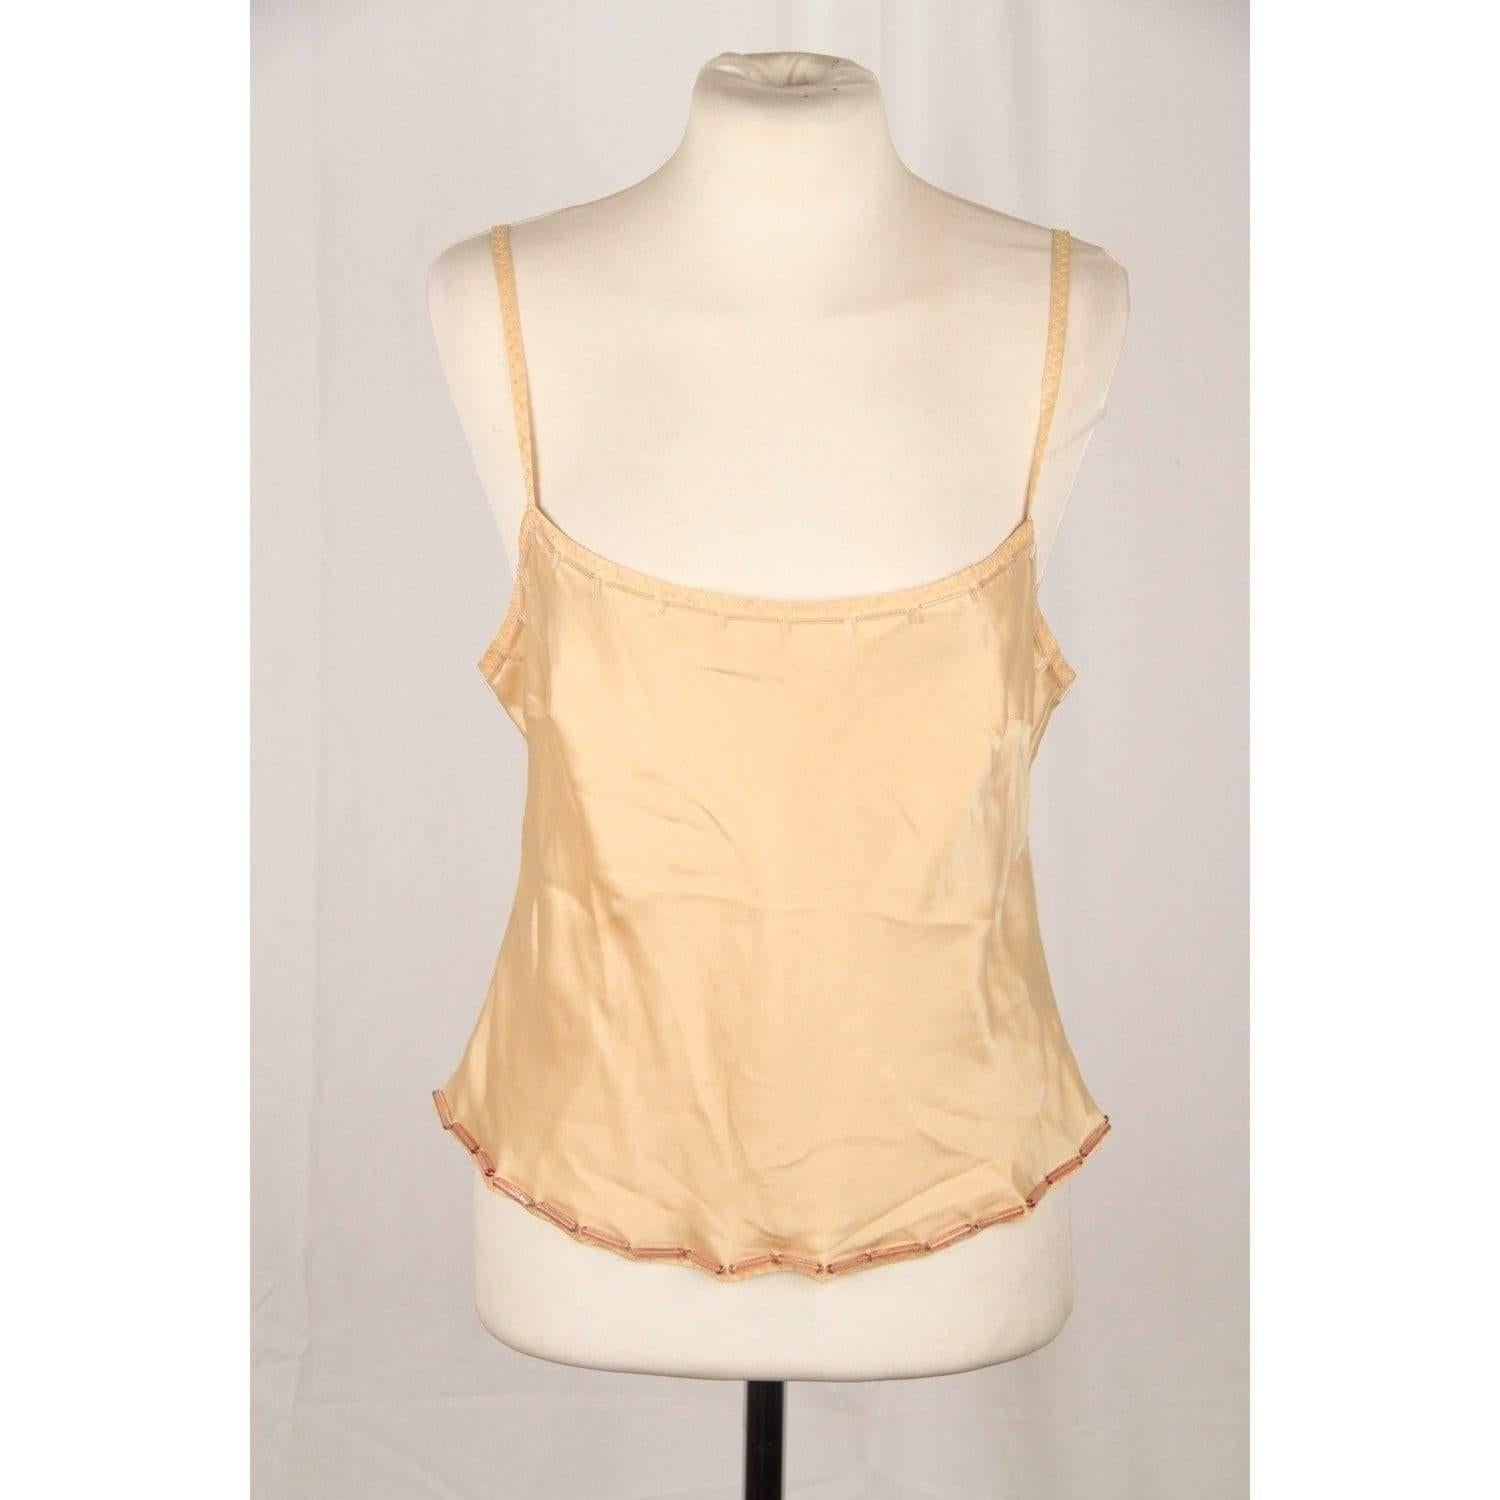 MATERIAL: Silk COLOR: Beige MODEL: CamiTop GENDER: Women SIZE: Small CONDITION RATING: A :EXCELLENT CONDITION - Used once or twice. Looks mint. Imperceptible signs of wear CONDITION DETAILS: Gently used! MEASUREMENTS: SHOULDER TO SHOULDER: - BUST: